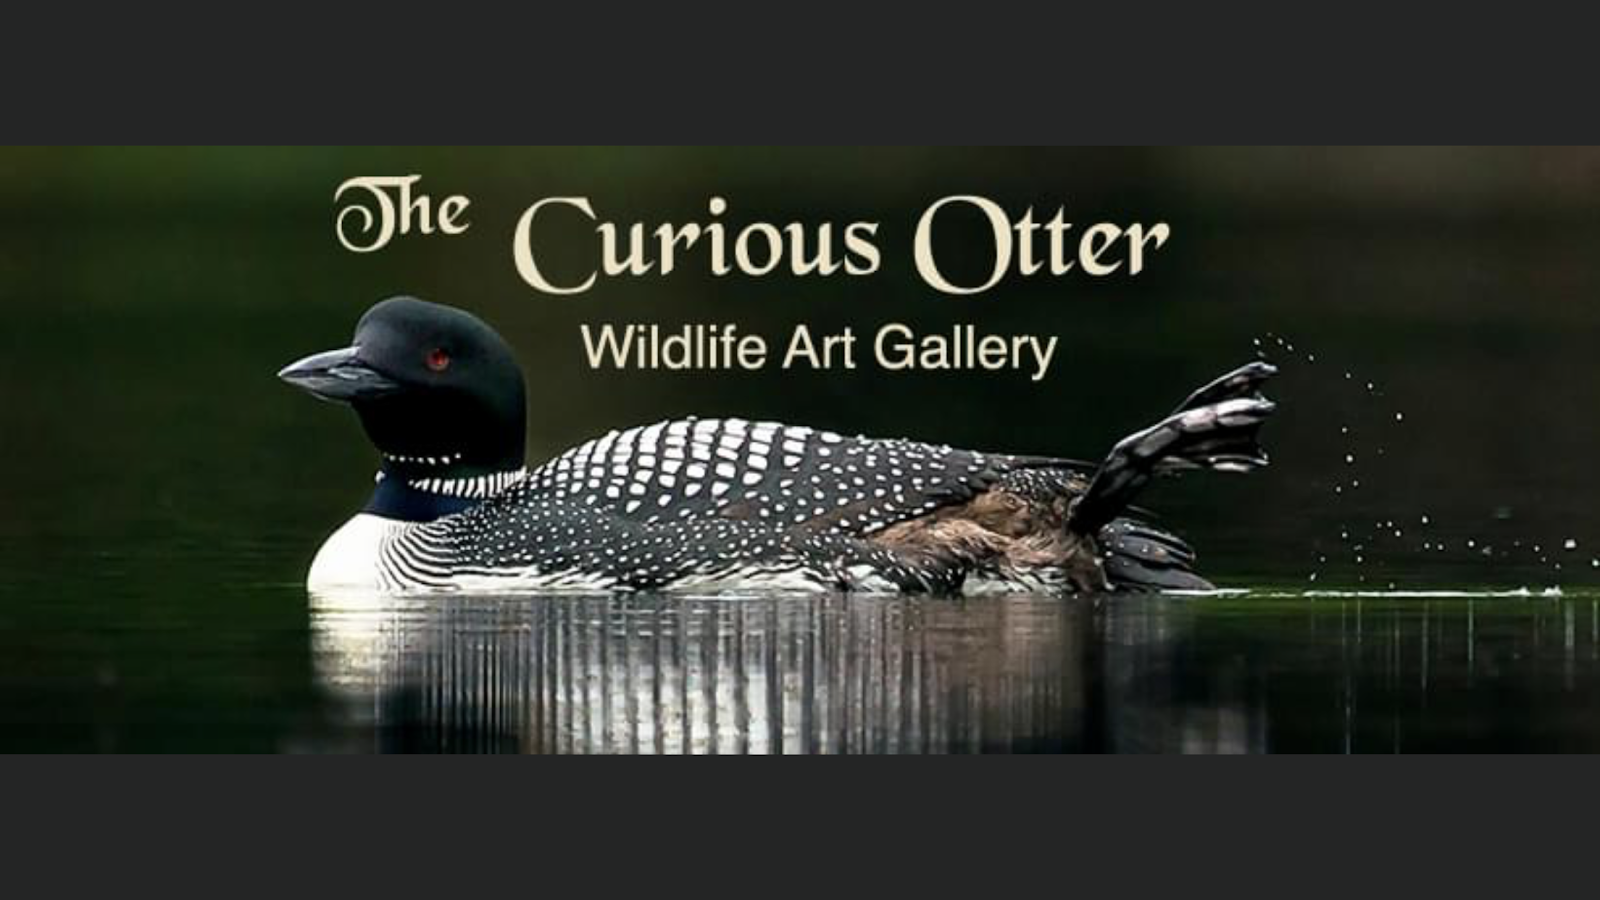 The Curious Otter